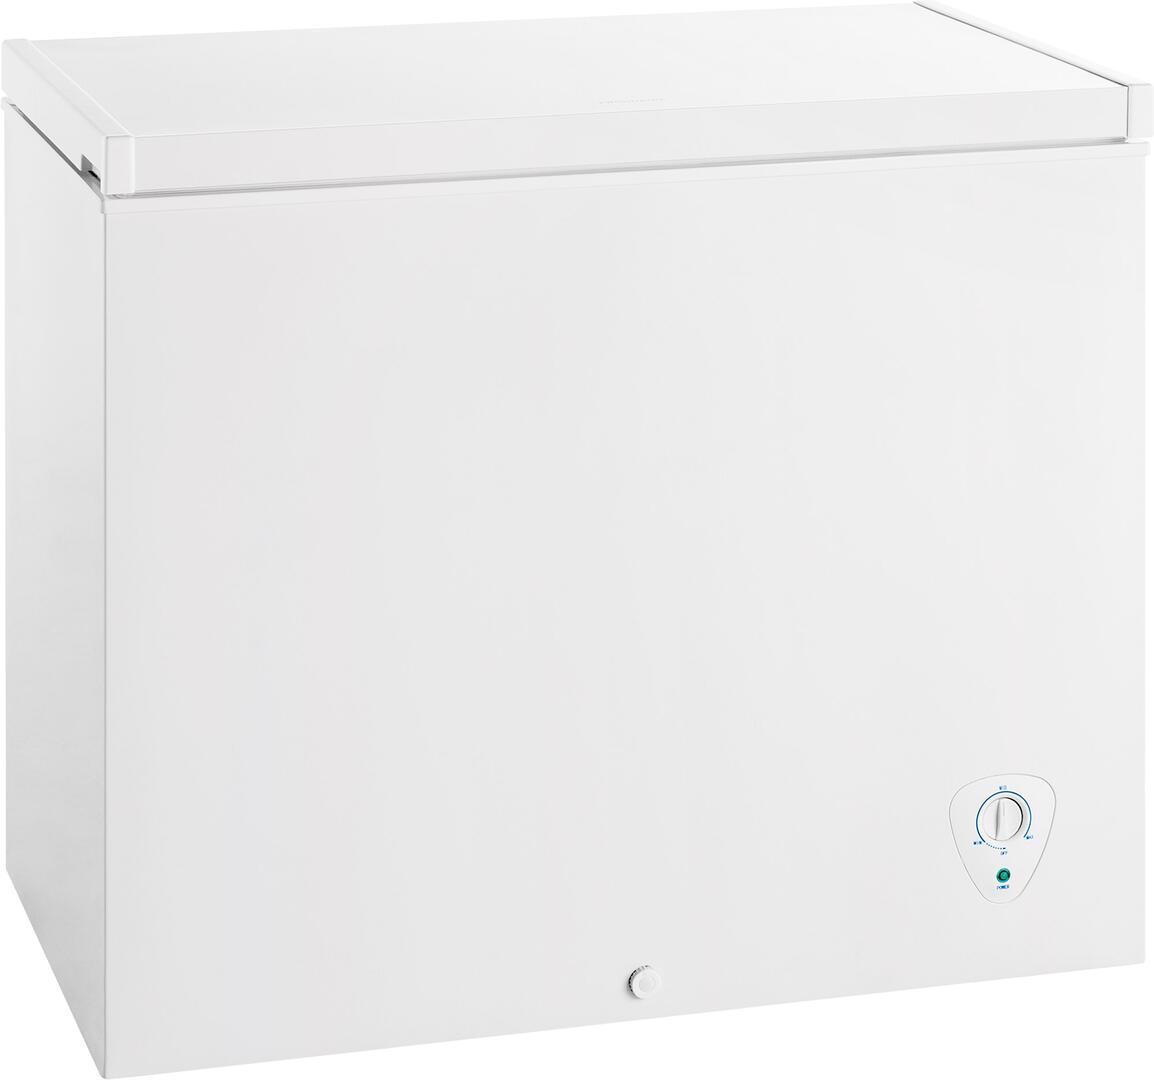 FFFC09M1RW Energy Efficient Chest Freezer with 8.7 Cu. Ft. Capacity Power-on Indicator Light Store-More Removable Basket and Adjustable Temperature Control in White - image 5 of 11